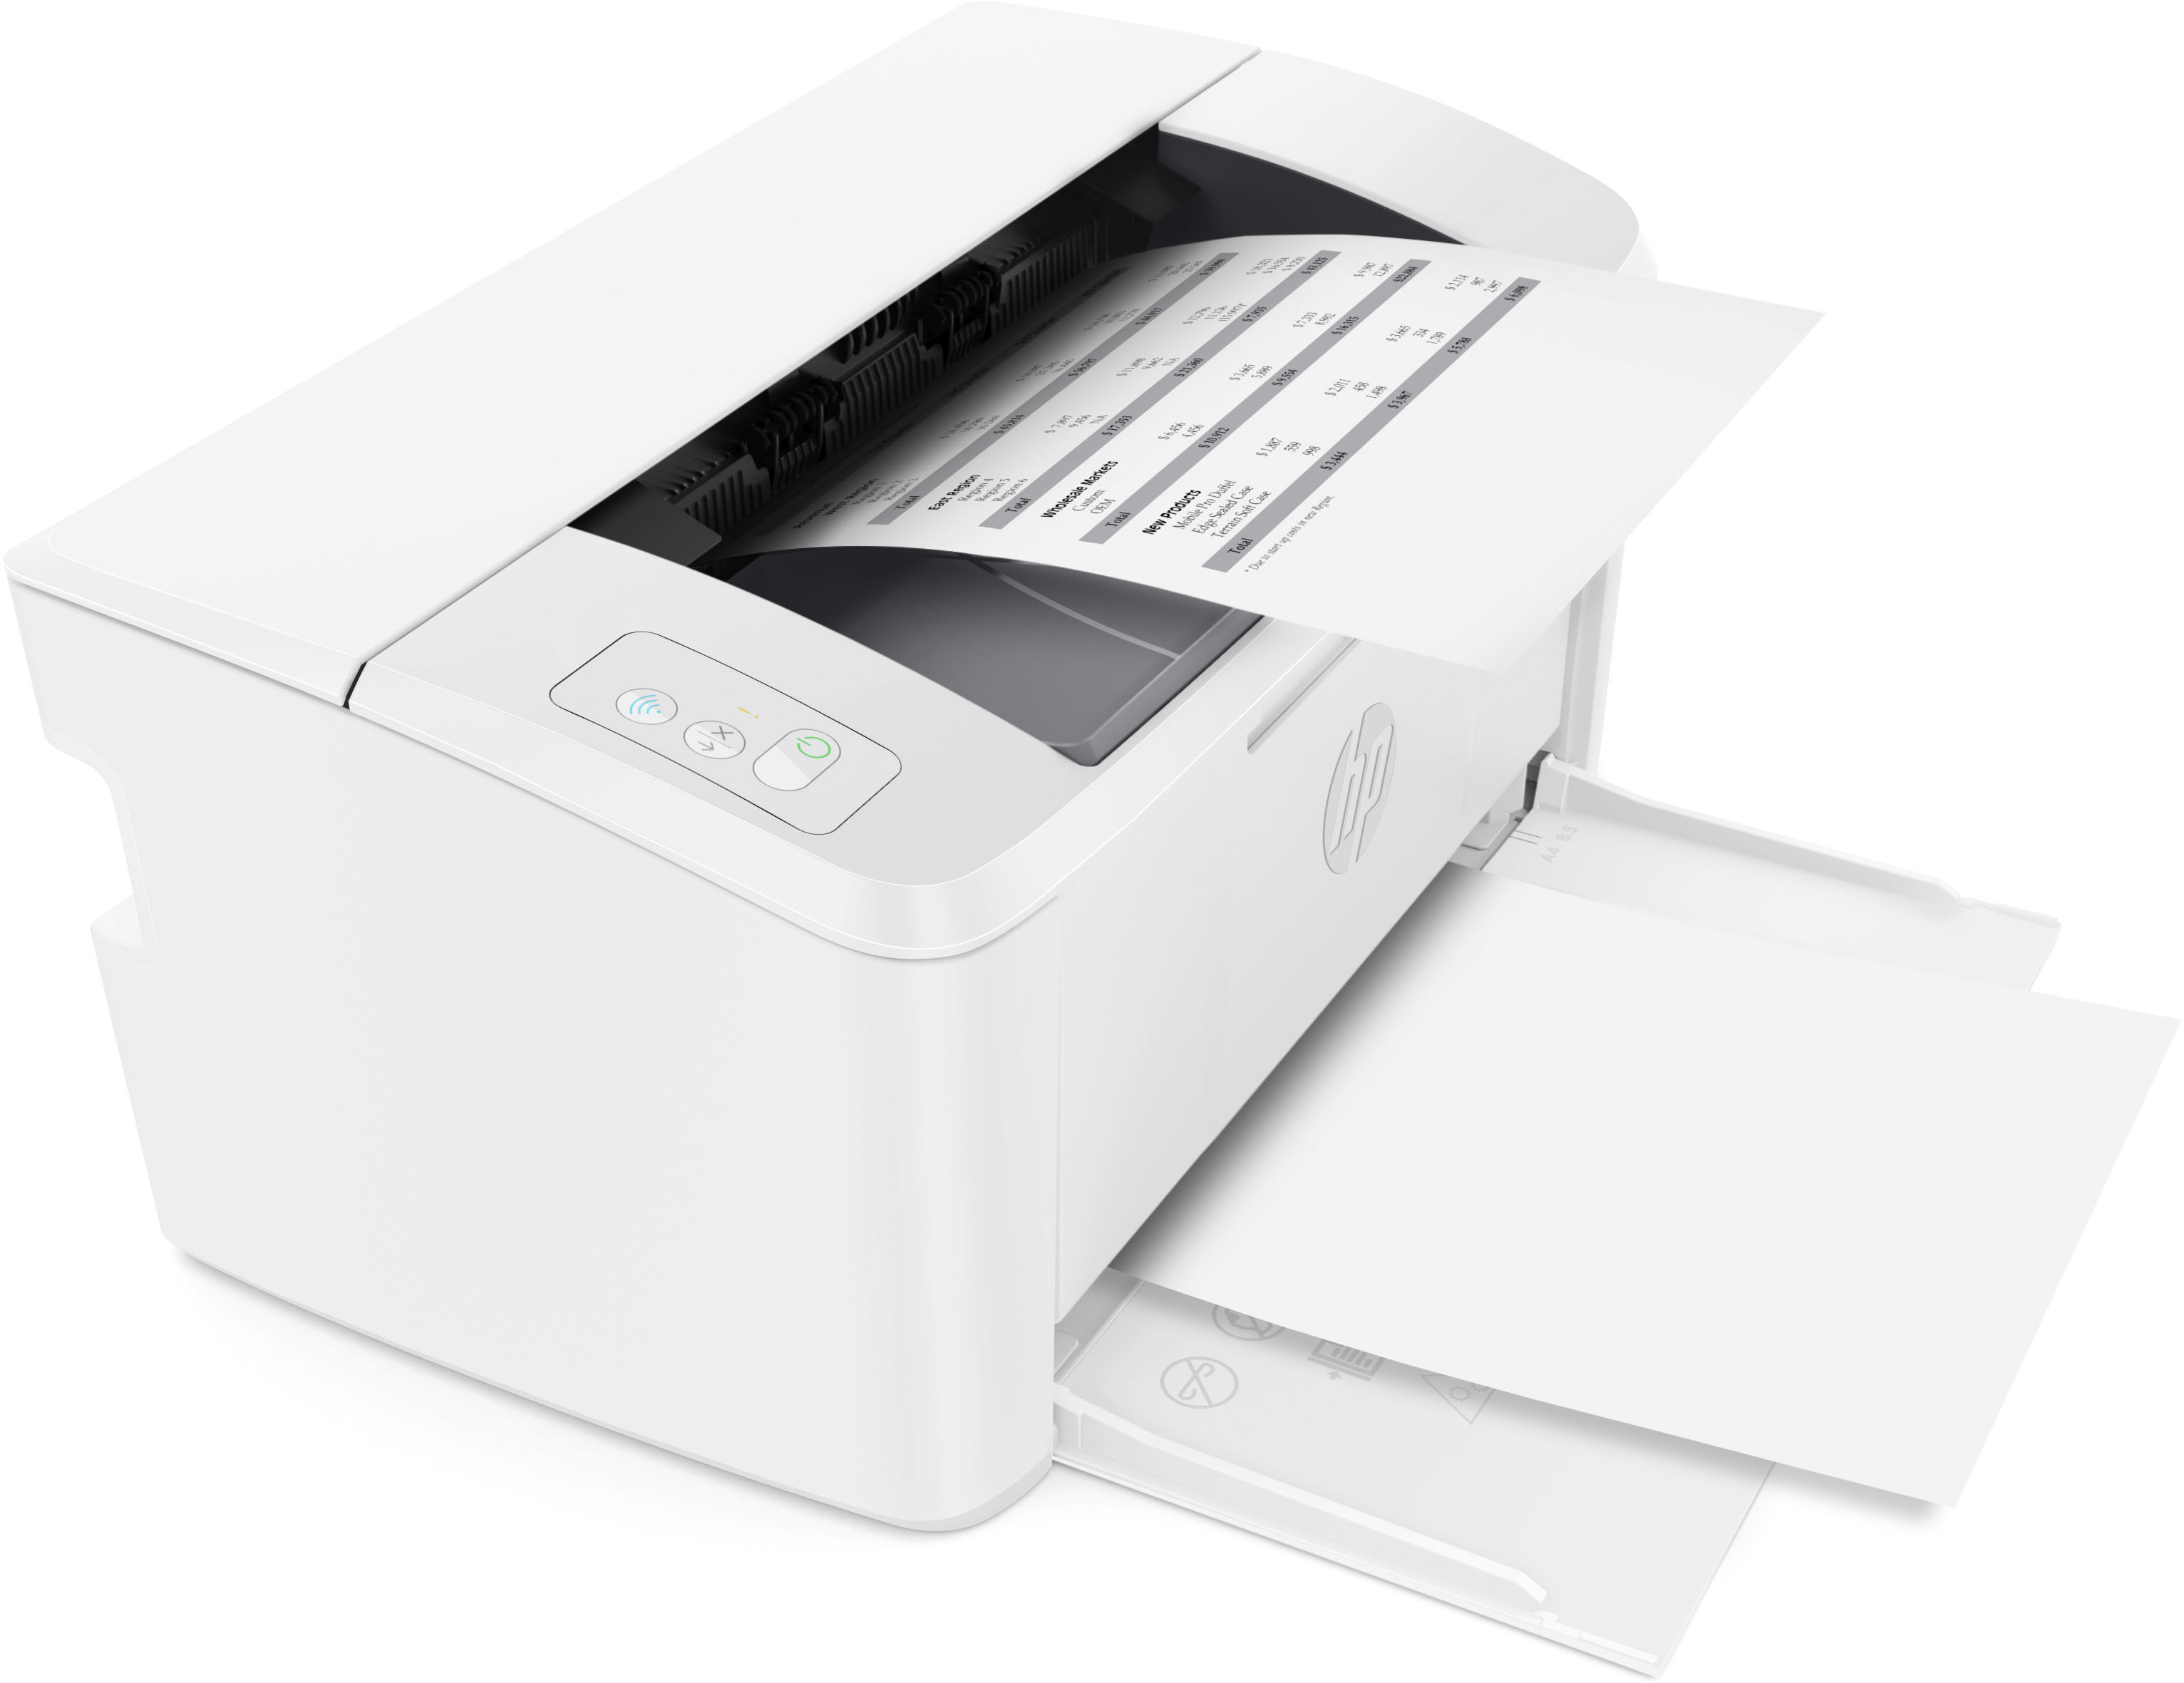 HP LaserJet M110we Wireless Black Laser months Ink White Printer White M110we HP+ of included and with - Buy LaserJet Best with 6 Instant